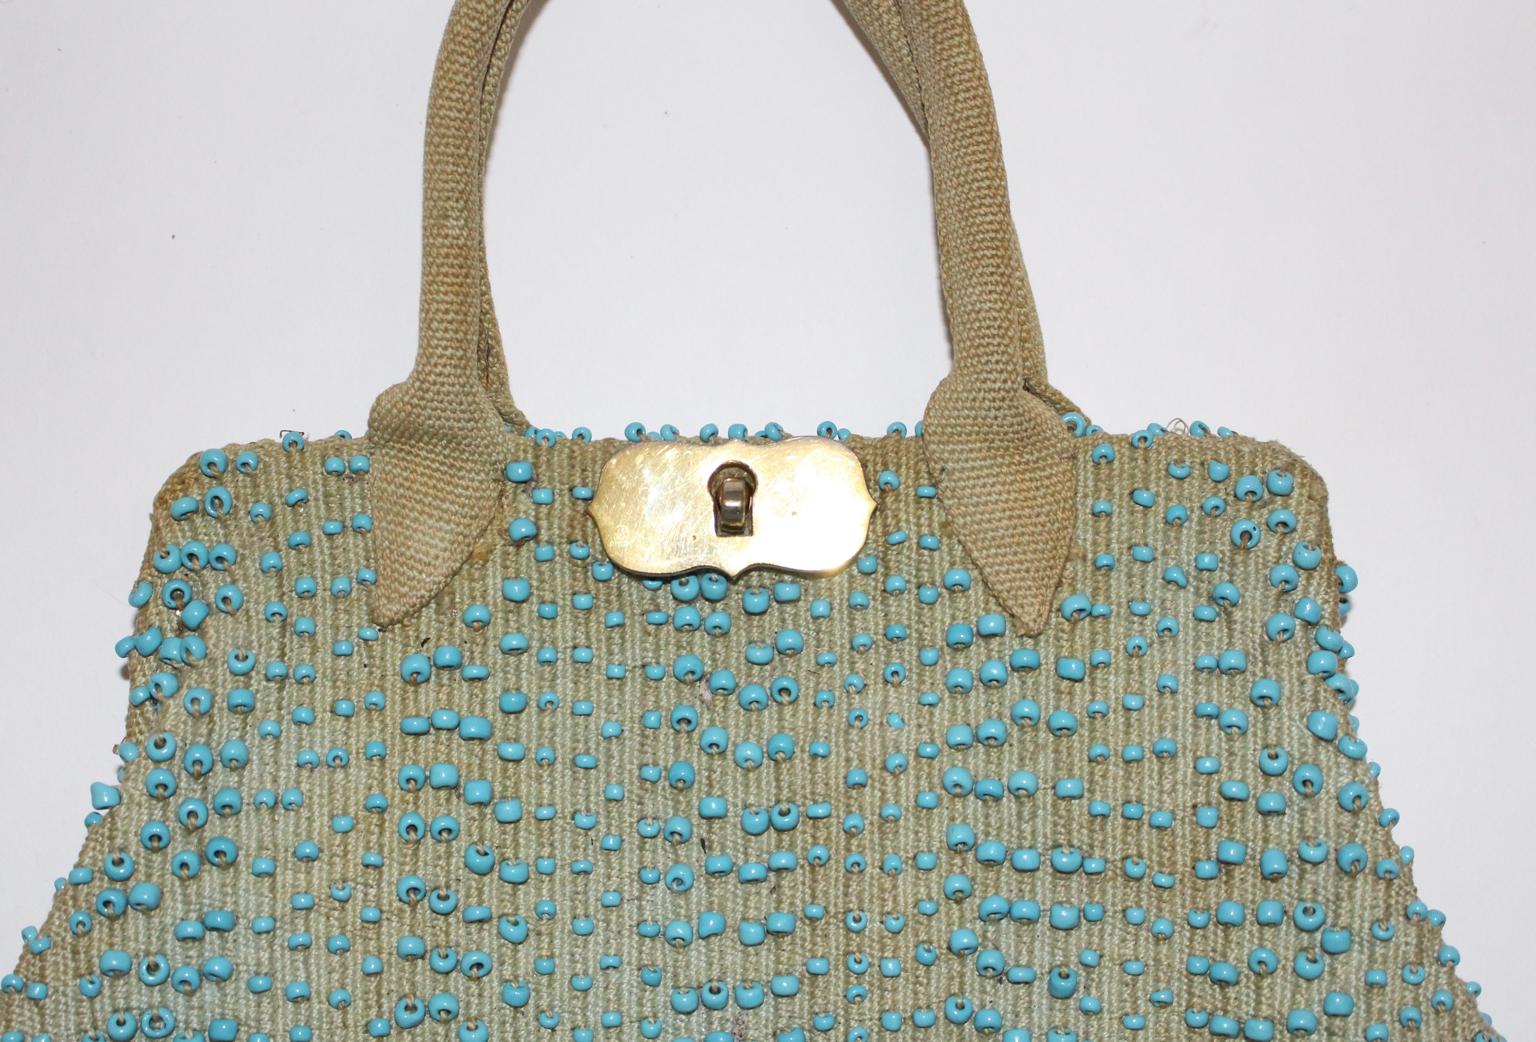 This presented rare and beautiful Vintage Handbag made of canvas and stitched with many light blue beads was designed and made in Italy c. 1950 by Roberta di Camerino.
The designer Roberta di Camerino has founded her firm in Venice c. 1945.
She